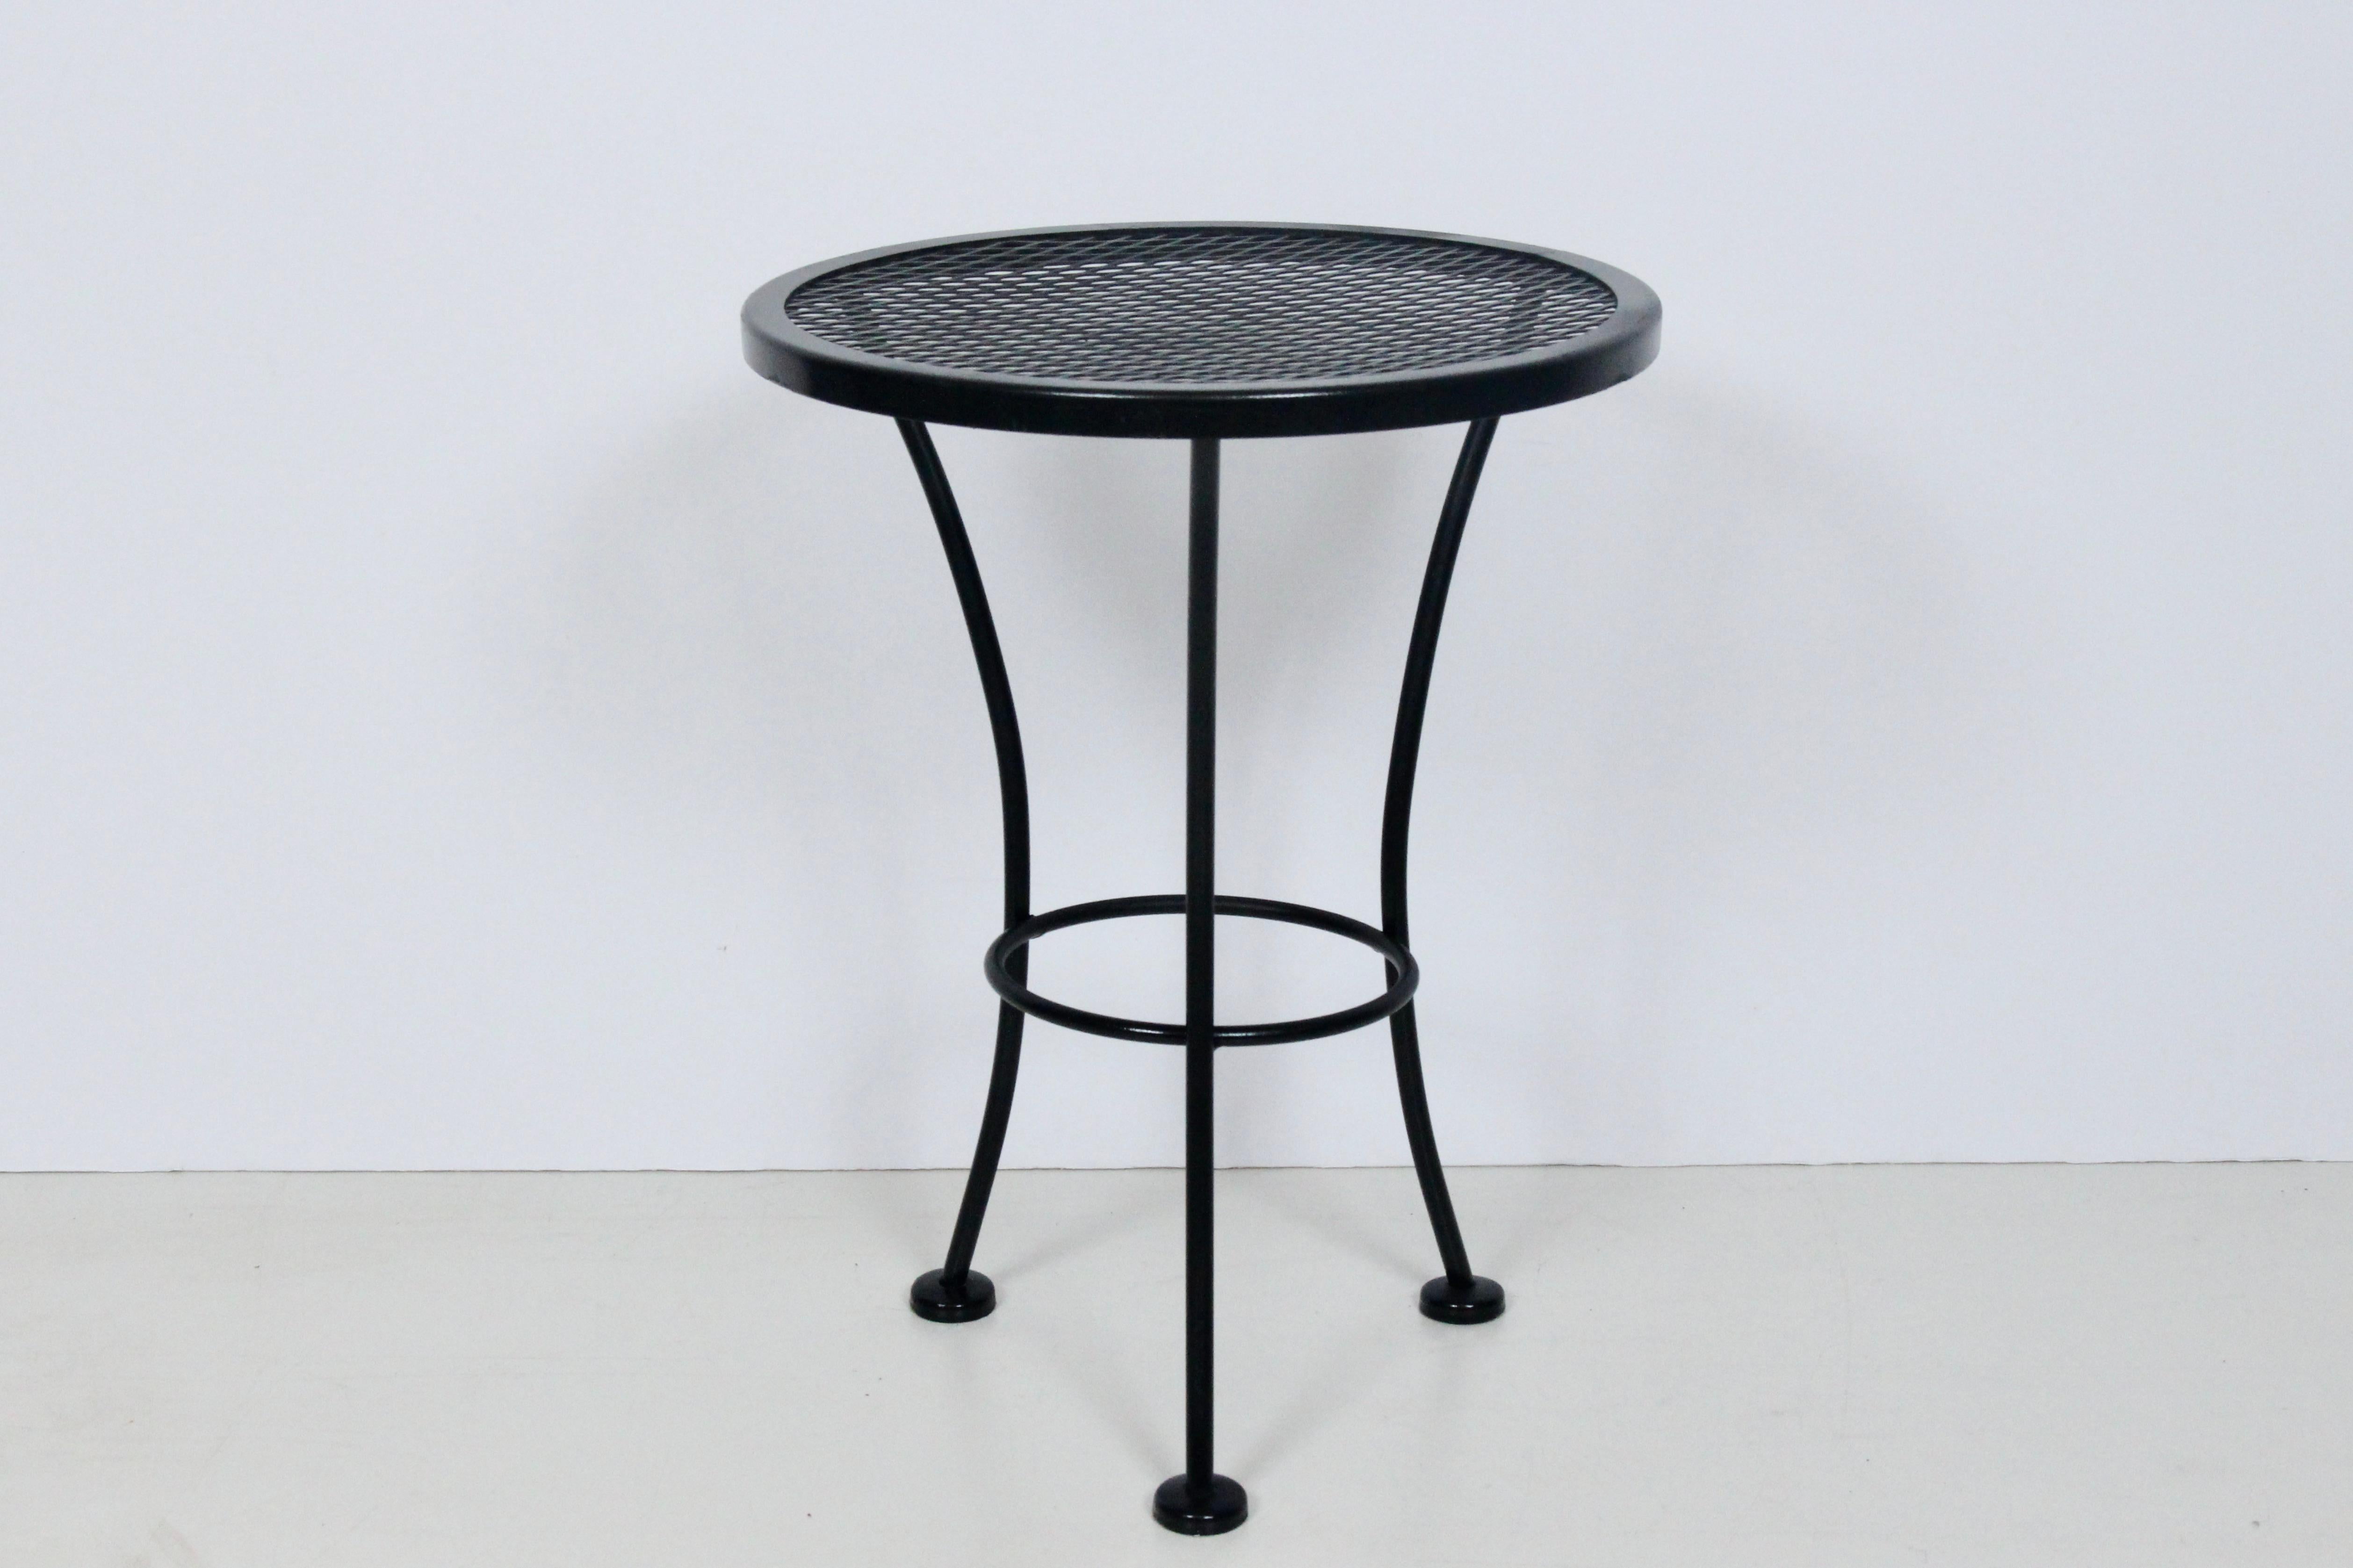 Original Russell Woodard Black Wrought Iron and Wire Mesh Occasional Table.  Featuring a High Black Gloss enameled three legged reinforced framework with sturdy circular, wire Mesh surface and capped feet.  Indoor / Outdoor. Versatile. 1950's.